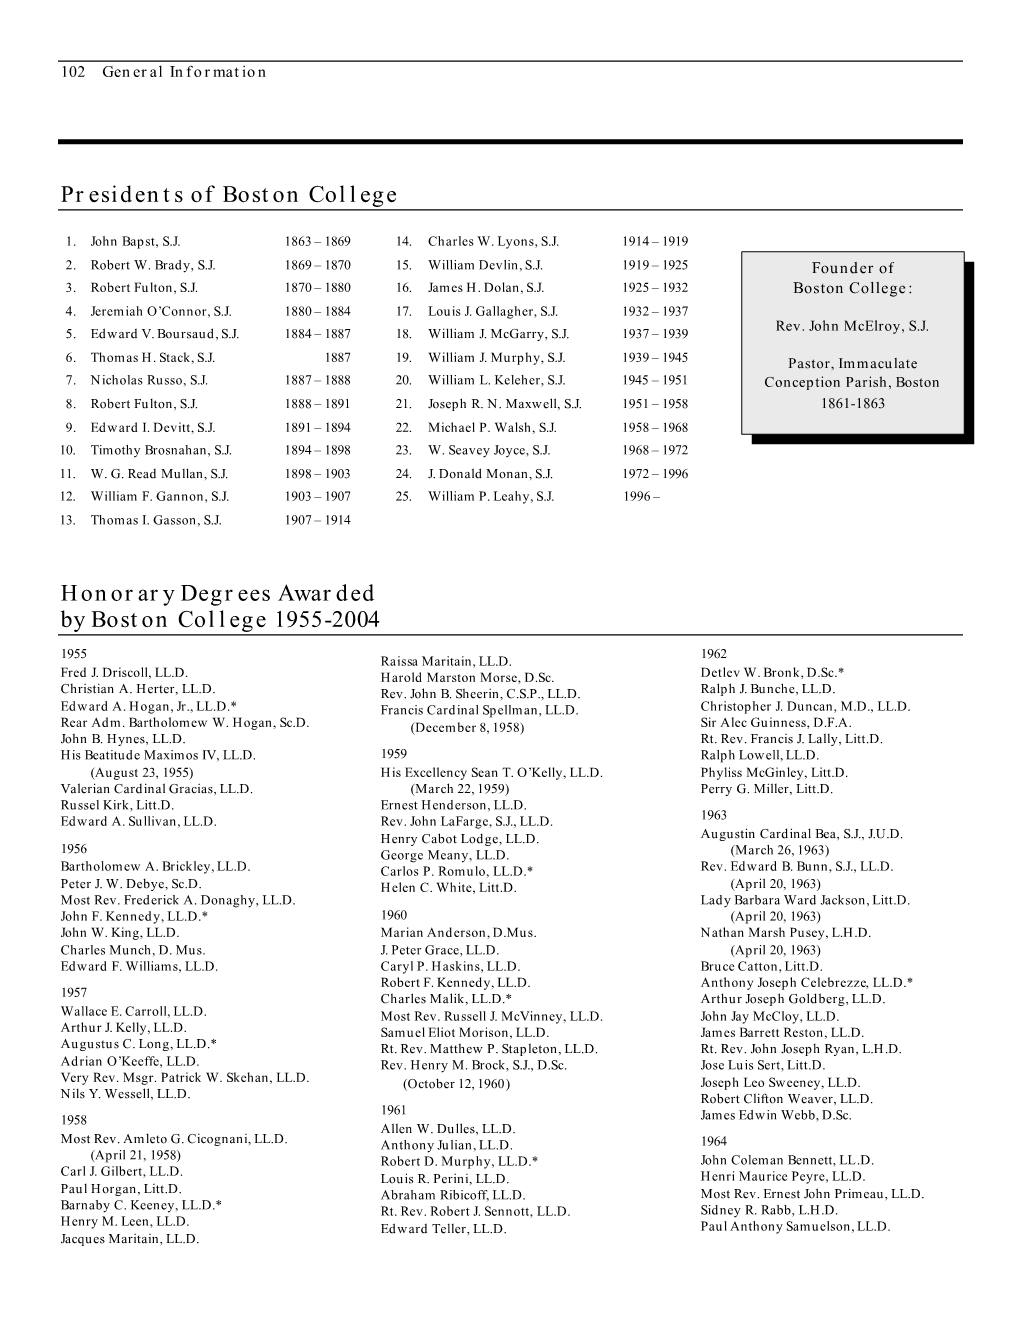 Presidents of Boston College Honorary Degrees Awarded By